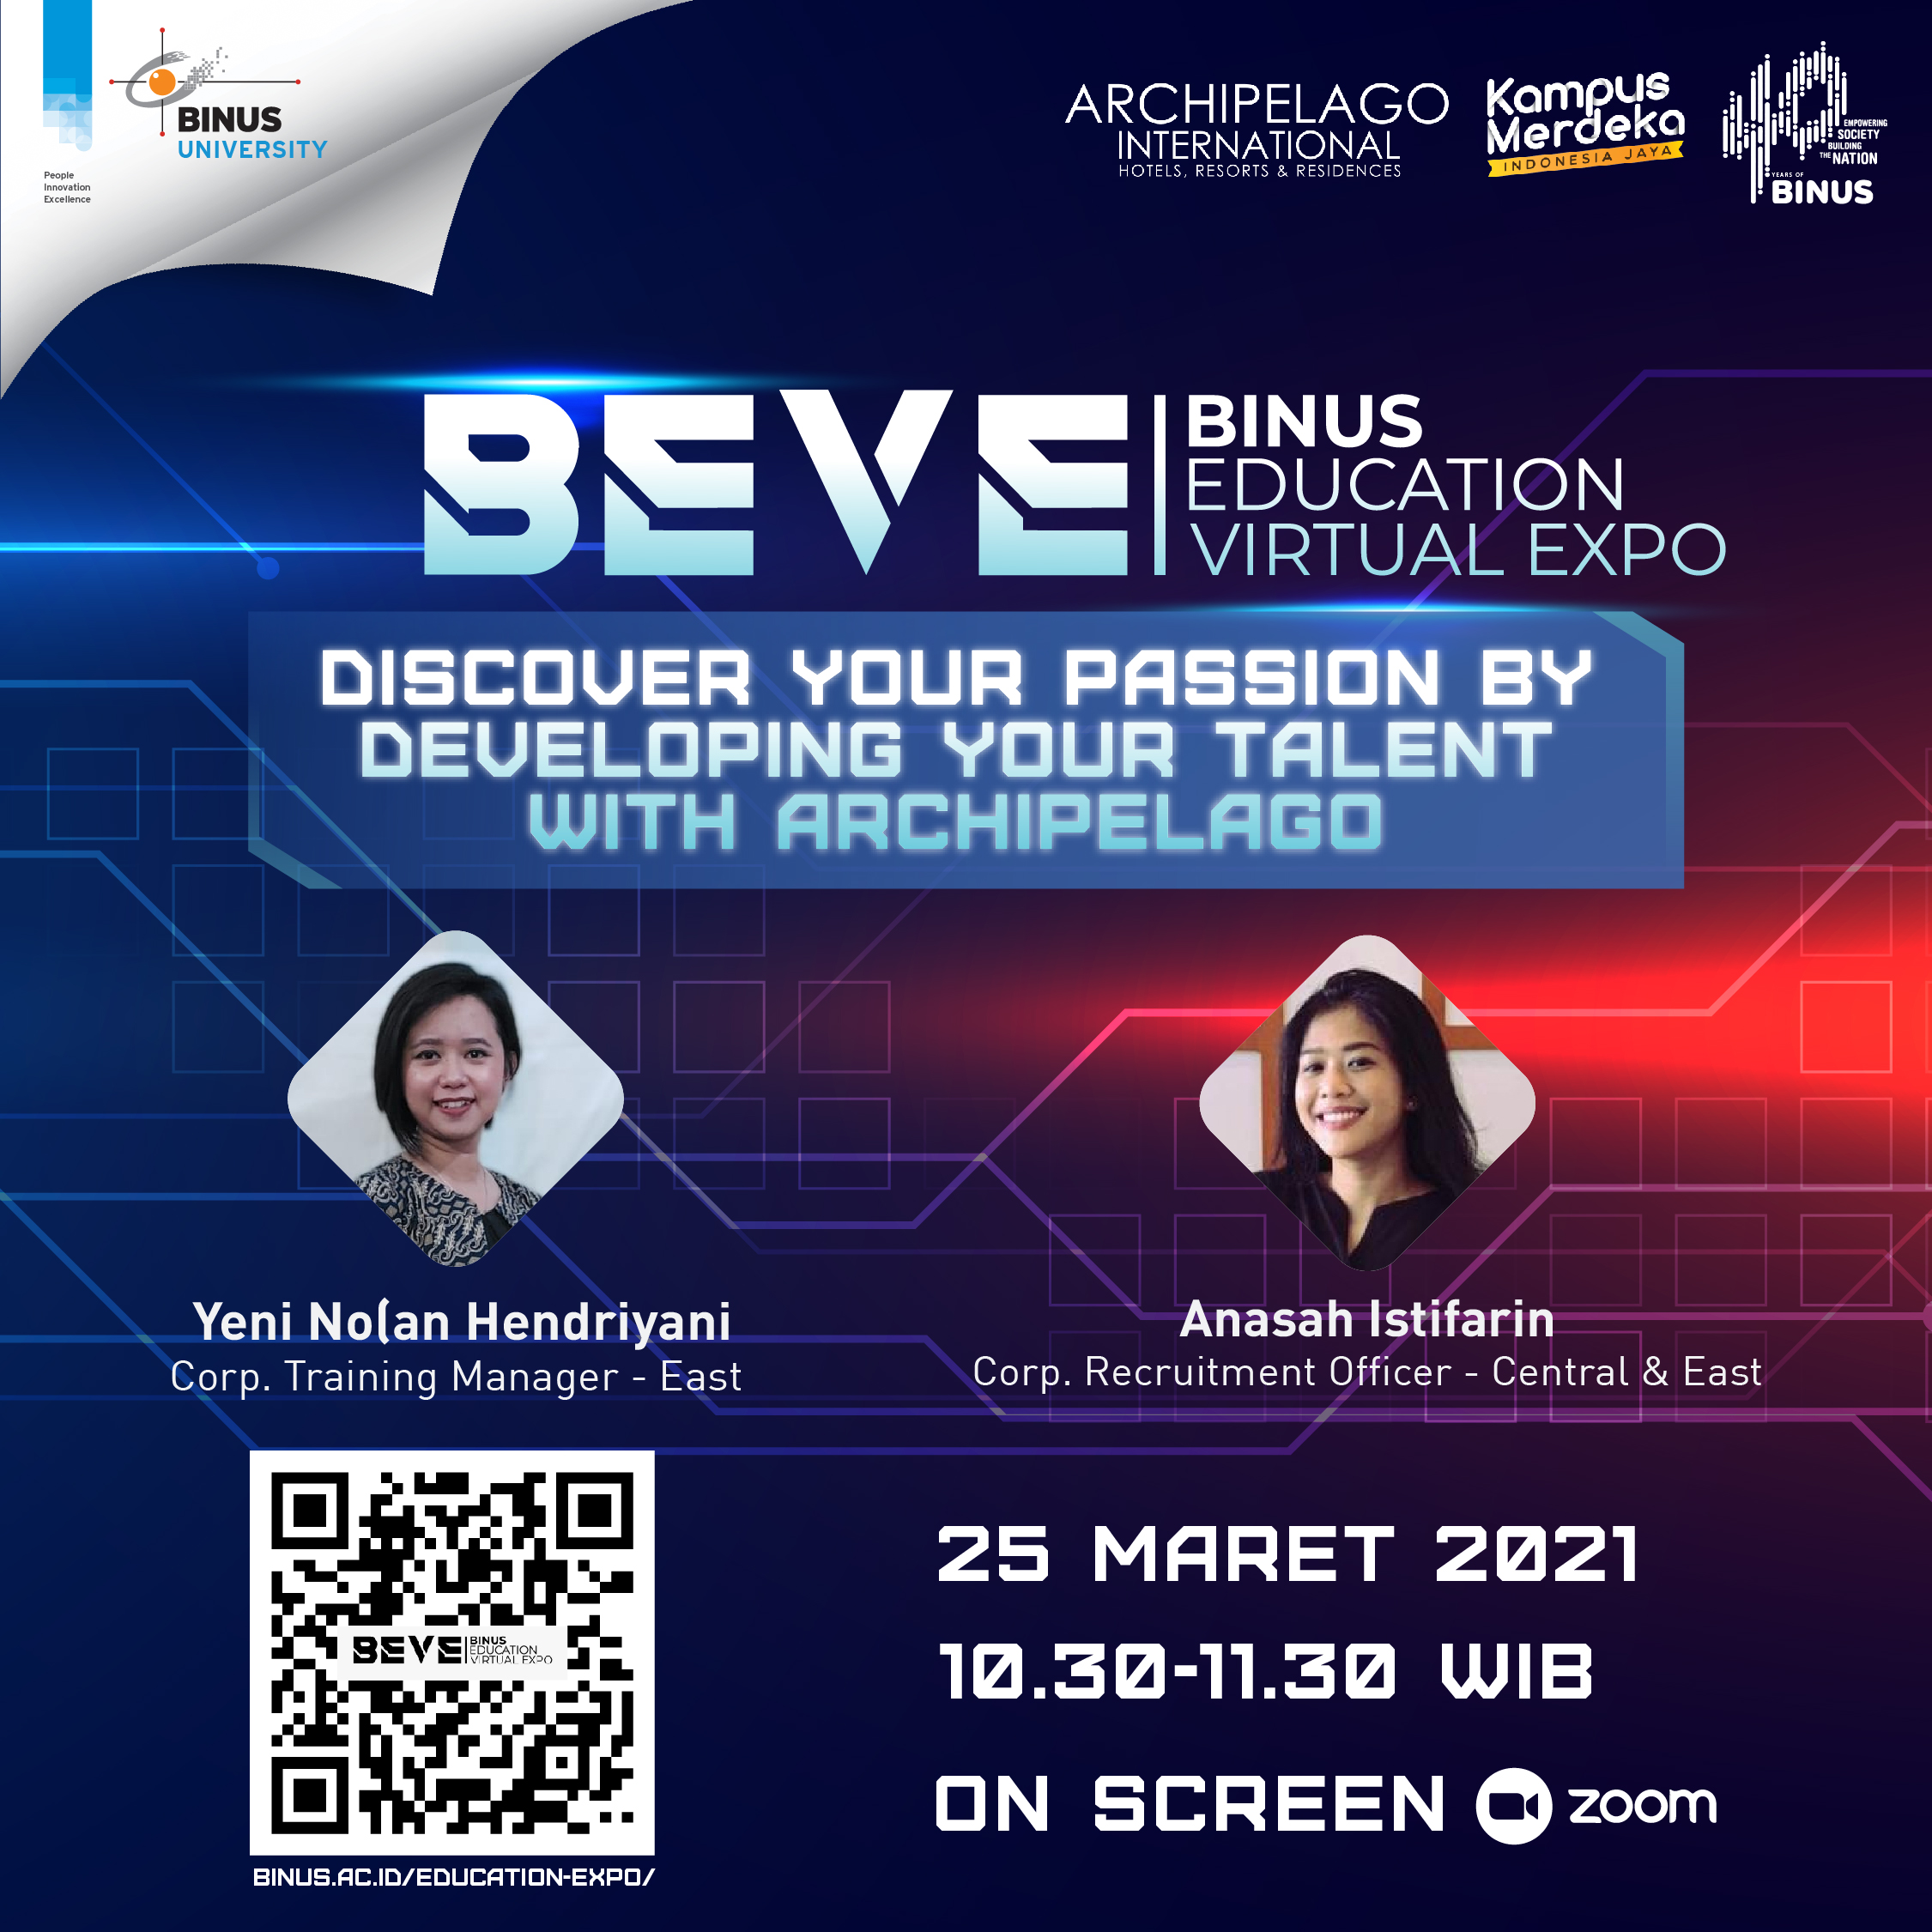 BINUS Career Company Session at BEVE 2021 (BINUS Education Virtual Expo): Discover Your Passion by Developing Your Talent with Archipelago